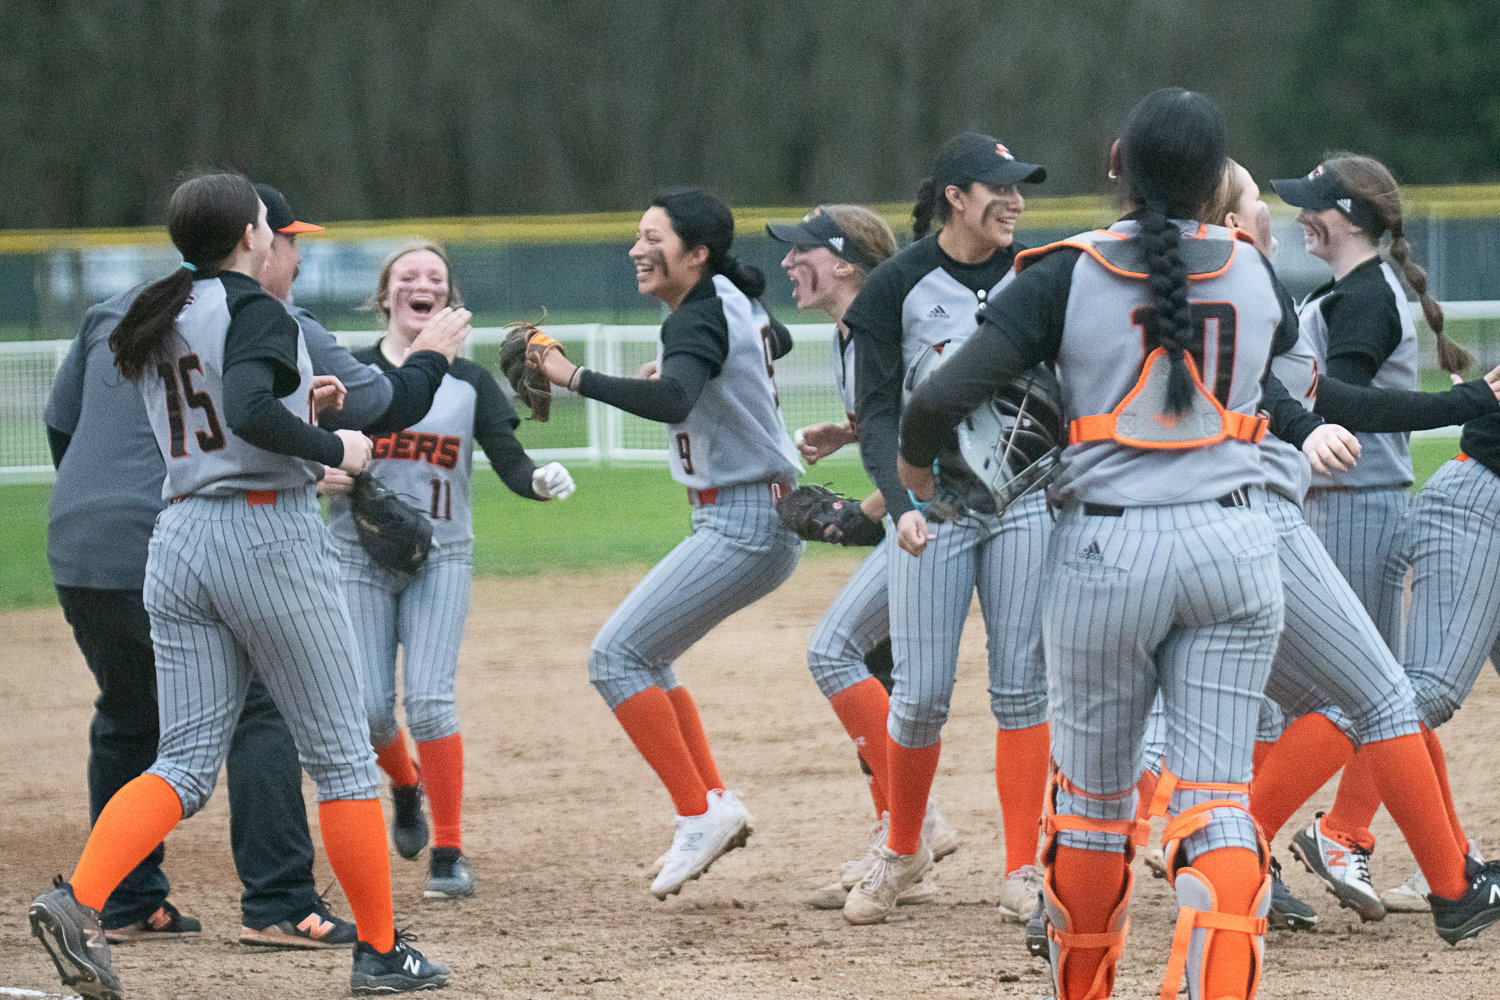 The Centralia softball team celebrates after the final out of its 5-3 win over W.F. West on March 28.